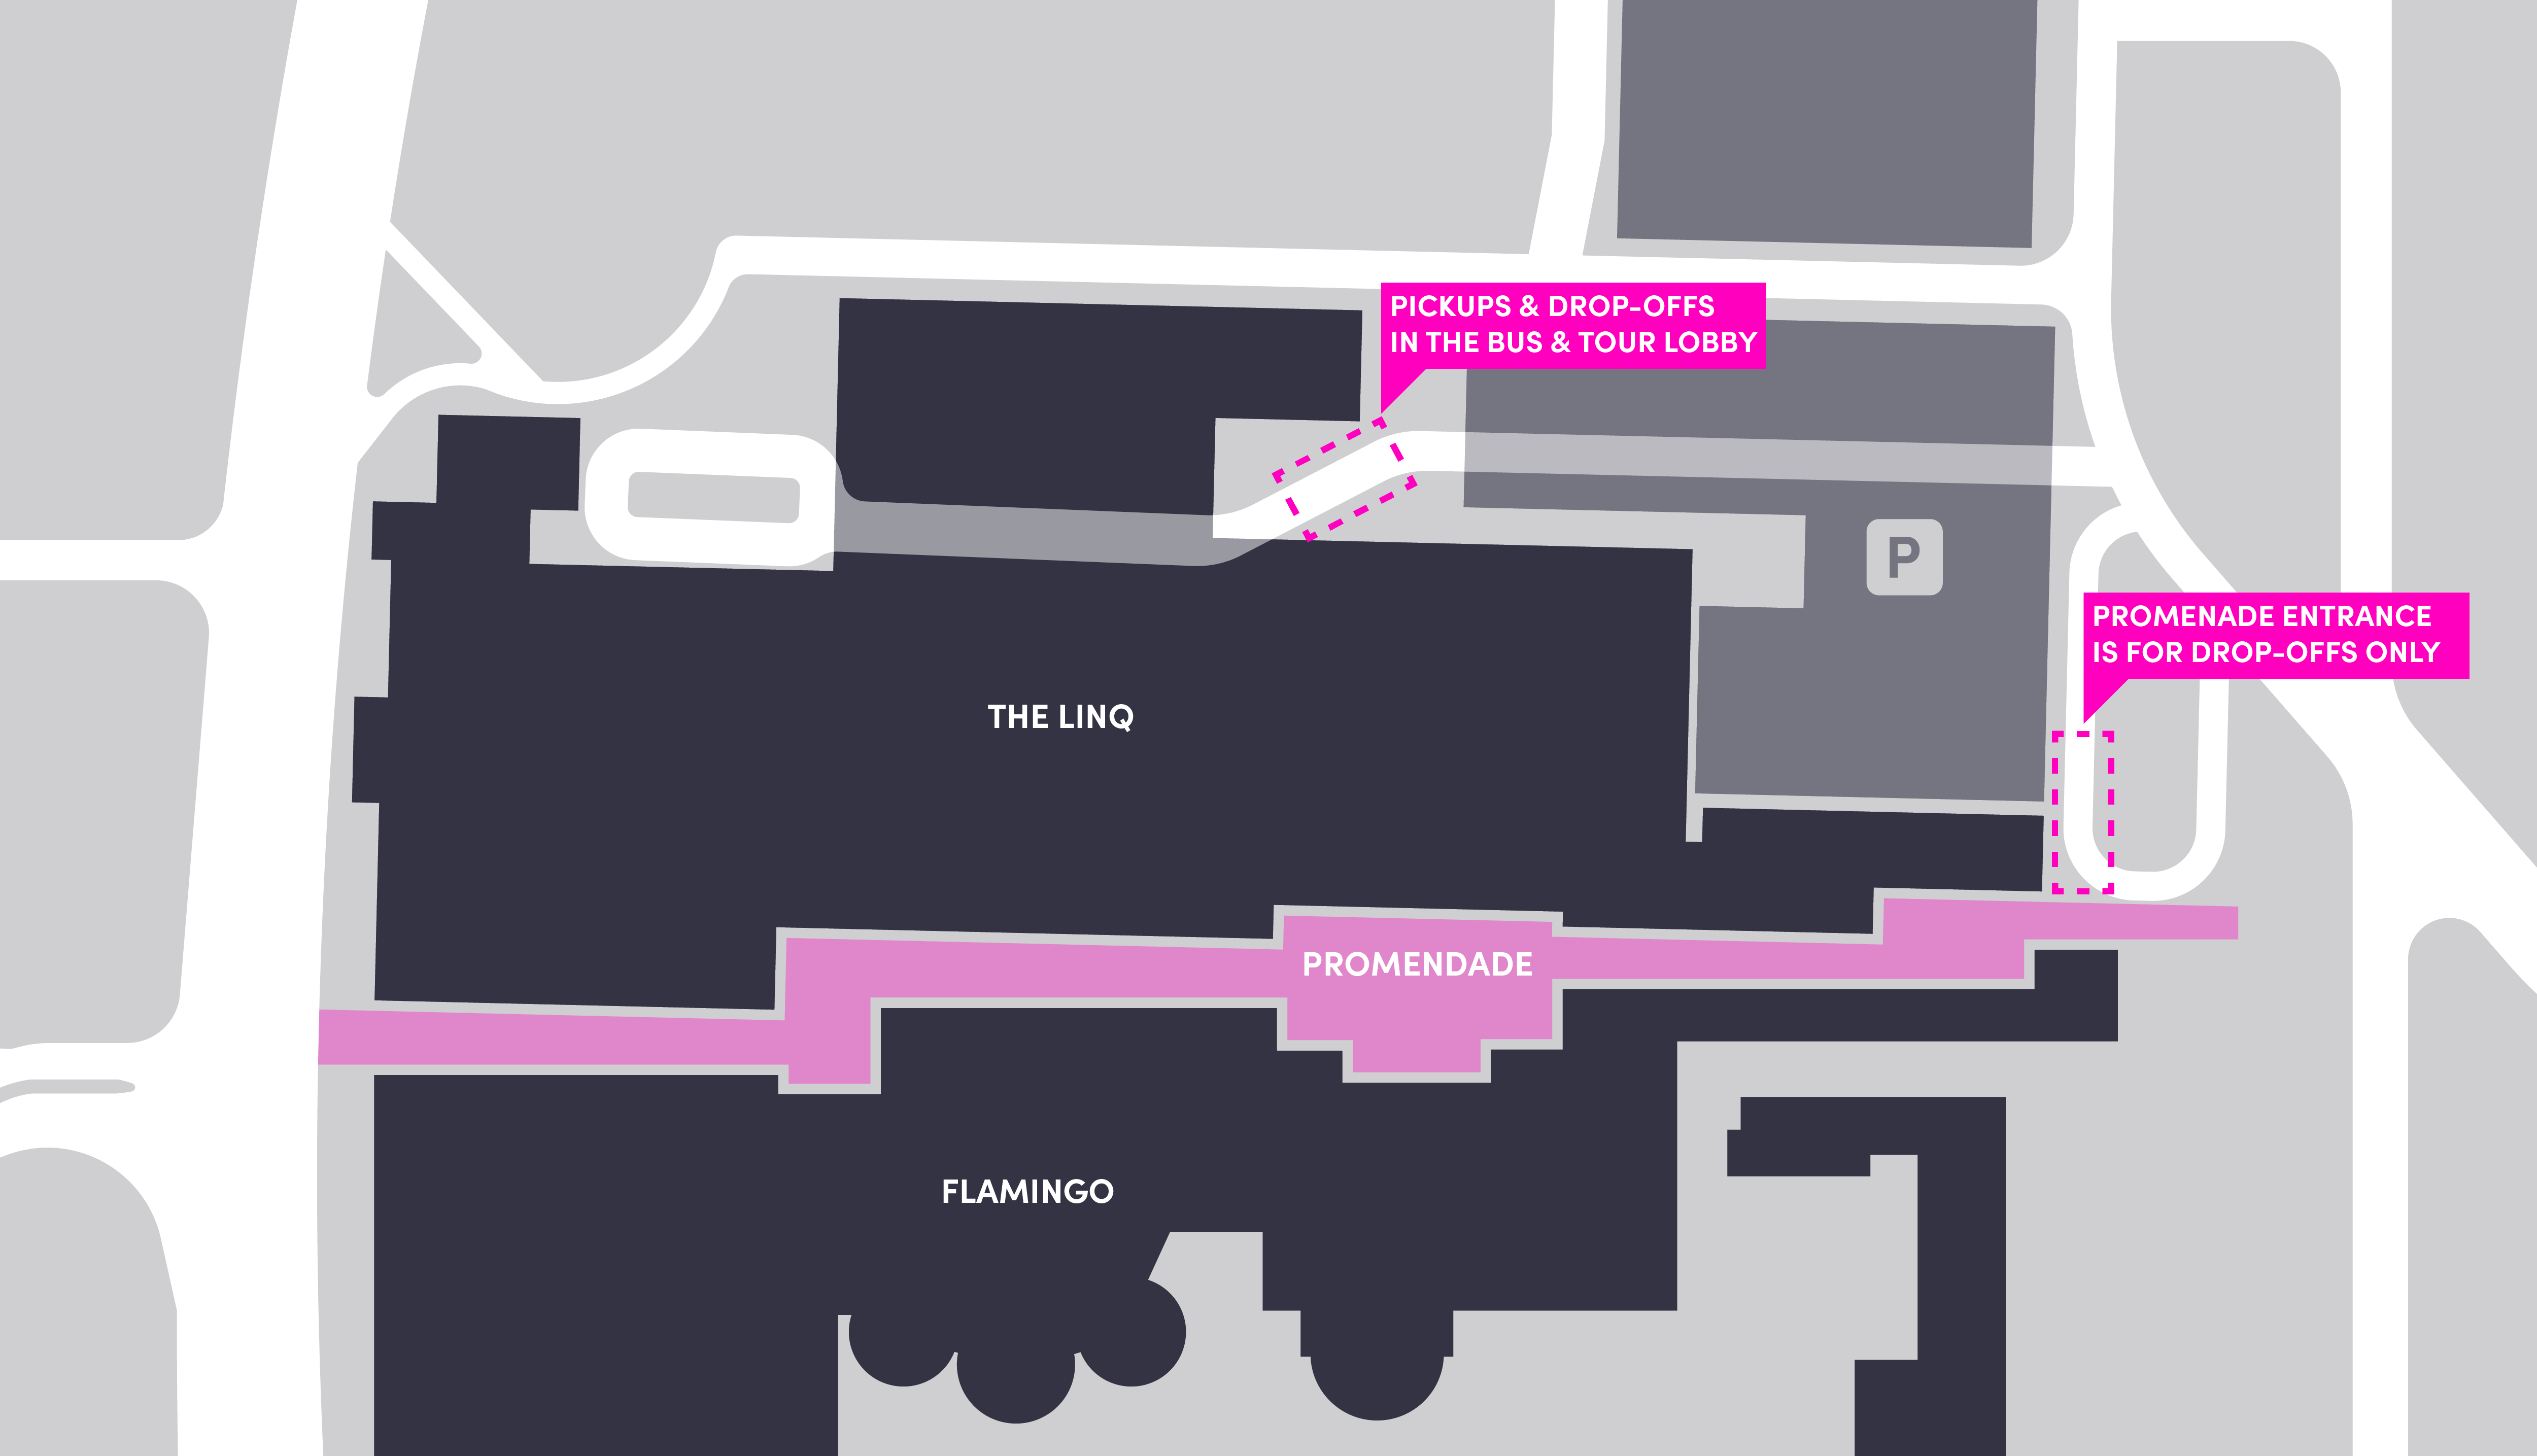 Map of the pickup and drop-off areas at the Linq in Las Vegas.